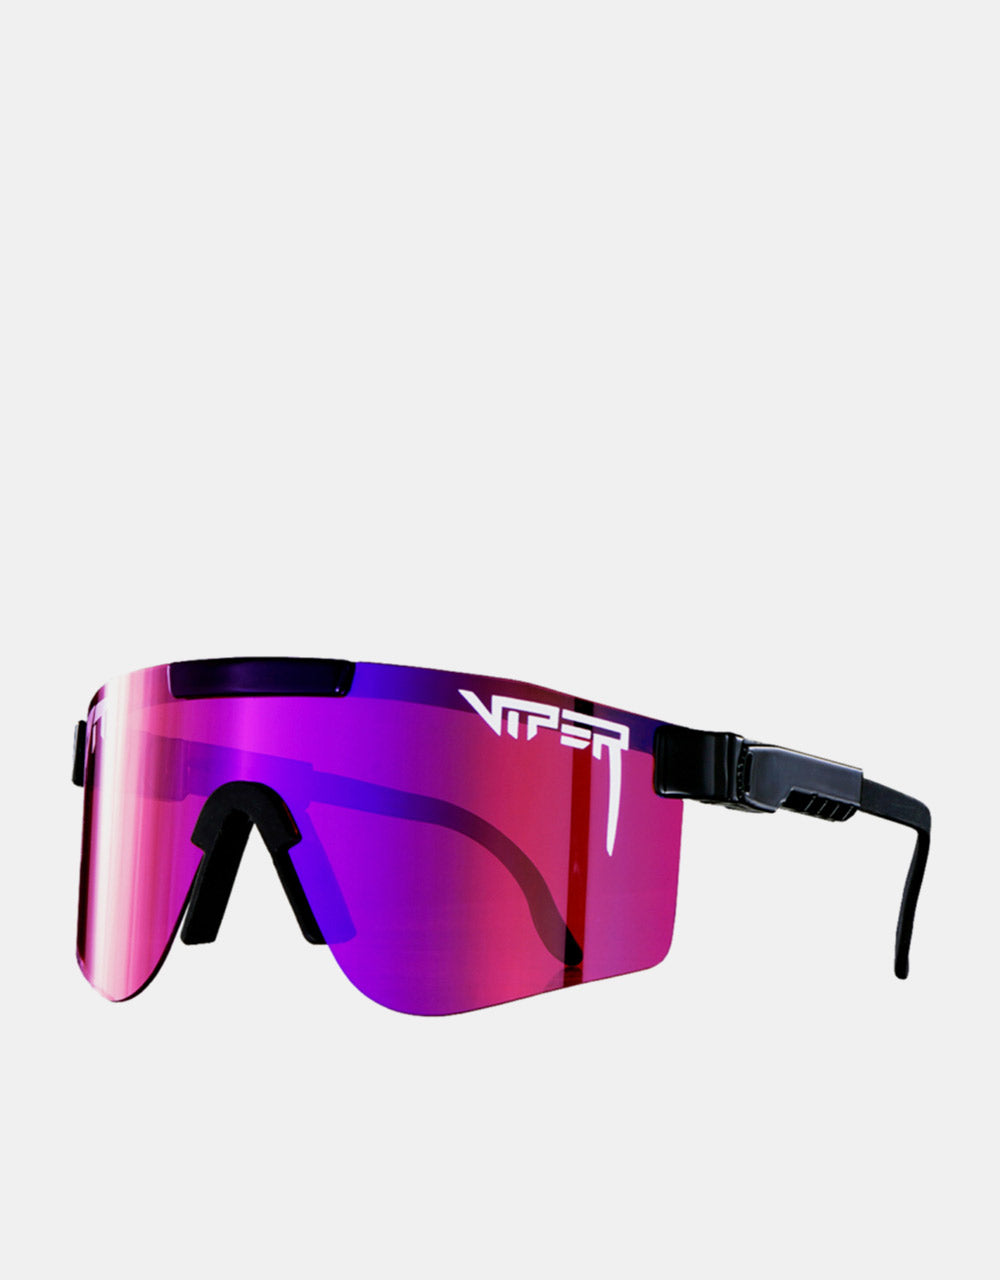 Pit Viper Mud Slinger Double Wide Sunglasses - Amber Reflective